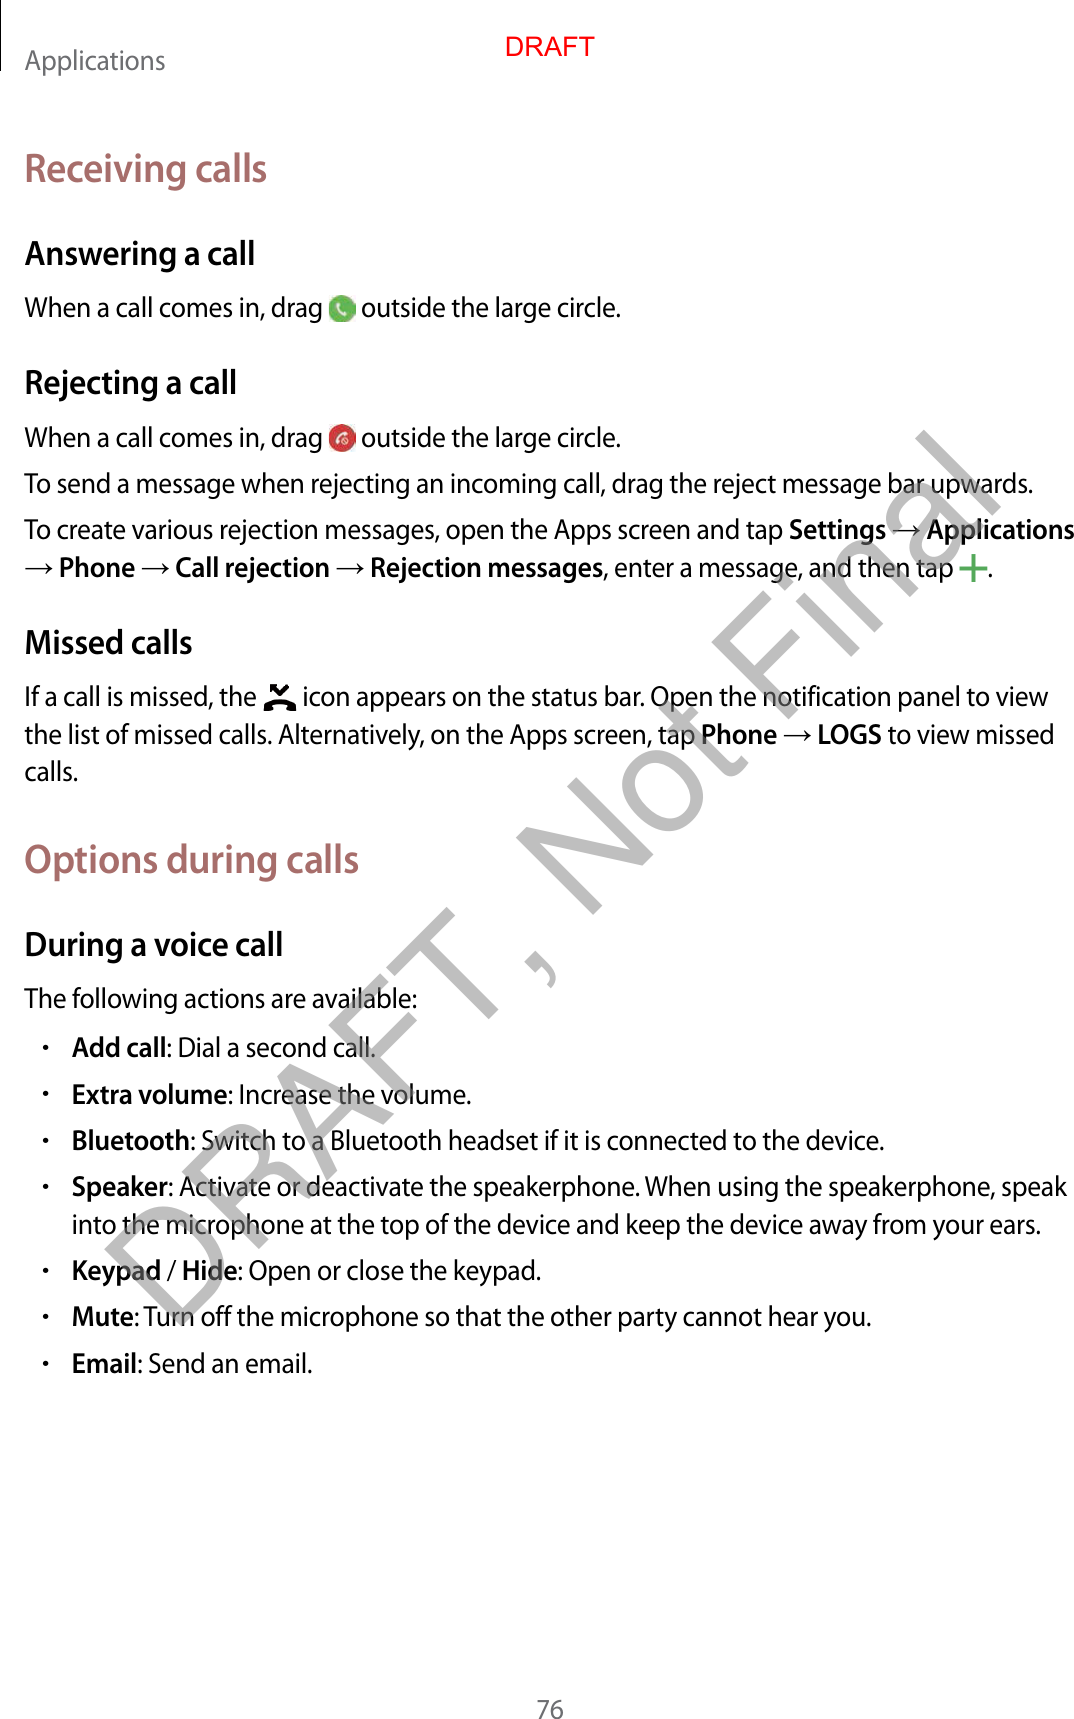 Applications76Receiving callsAnswering a callWhen a call comes in, drag   outside the large circle.Rejecting a callWhen a call comes in, drag   outside the large circle.To send a message when rejecting an incoming call, drag the reject message bar upwards.To create various rejection messages, open the Apps screen and tap Settings  Applications  Phone  Call rejection  Rejection messages, enter a message, and then tap  .Missed callsIf a call is missed, the   icon appears on the status bar. Open the notification panel to view the list of missed calls. Alternatively, on the Apps screen, tap Phone  LOGS to view missed calls.Options during callsDuring a voice callThe following actions are available:•Add call: Dial a second call.•Extra volume: Increase the volume.•Bluetooth: Switch to a Bluetooth headset if it is connected to the device.•Speaker: Activate or deactivate the speakerphone. When using the speakerphone, speak into the microphone at the top of the device and keep the device away from your ears.•Keypad / Hide: Open or close the keypad.•Mute: Turn off the microphone so that the other party cannot hear you.•Email: Send an email.DRAFTDRAFT, Not Final